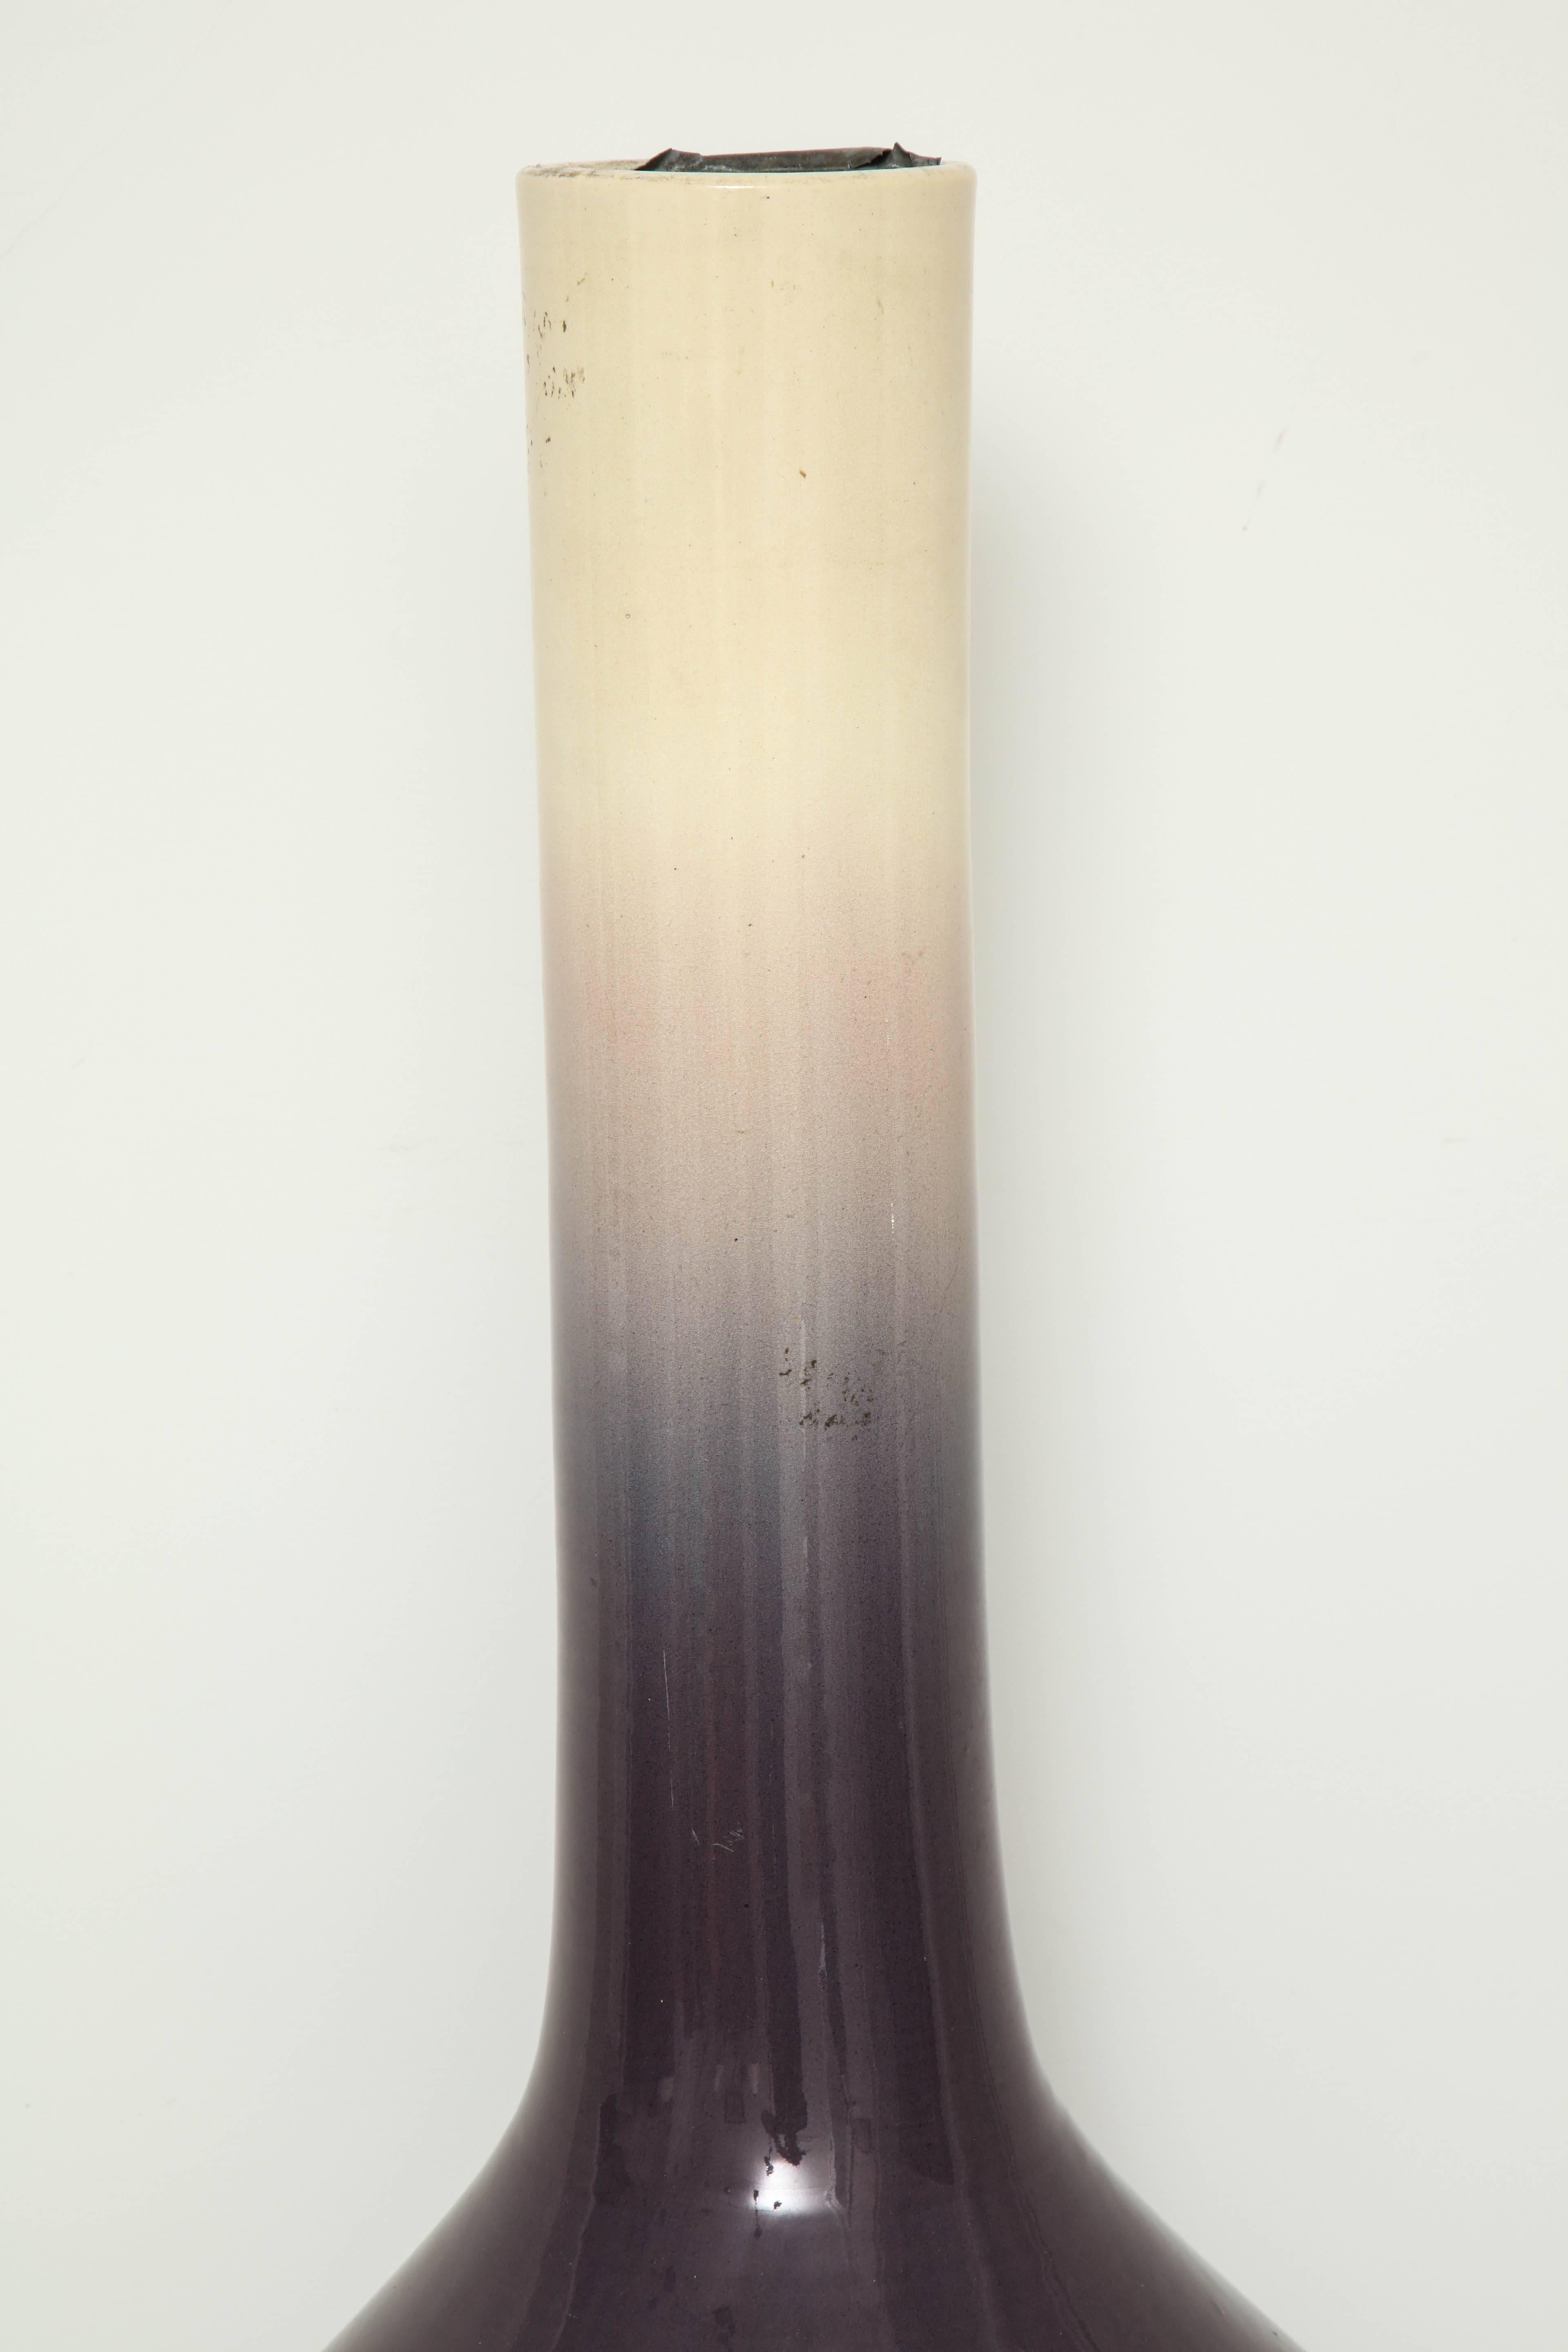 An exceptionally large Chinese flambé glazed vase with ombre coloring from deep purple to bisque. There is a removable metal insert to hold water in the neck of the vase.